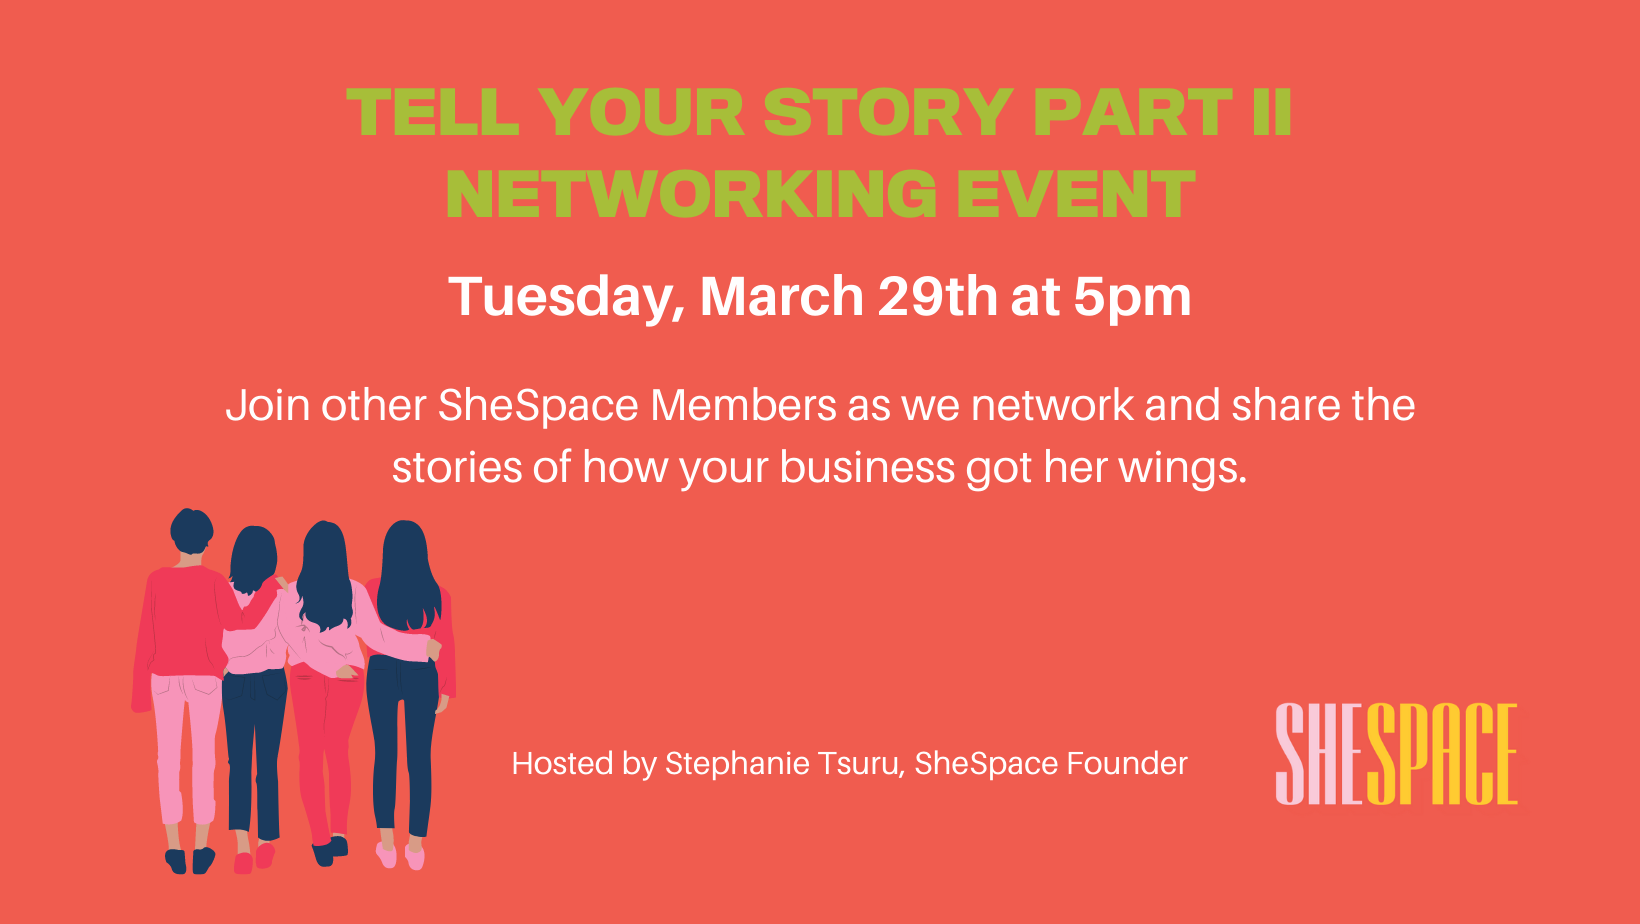 Tell your story networking event Part II